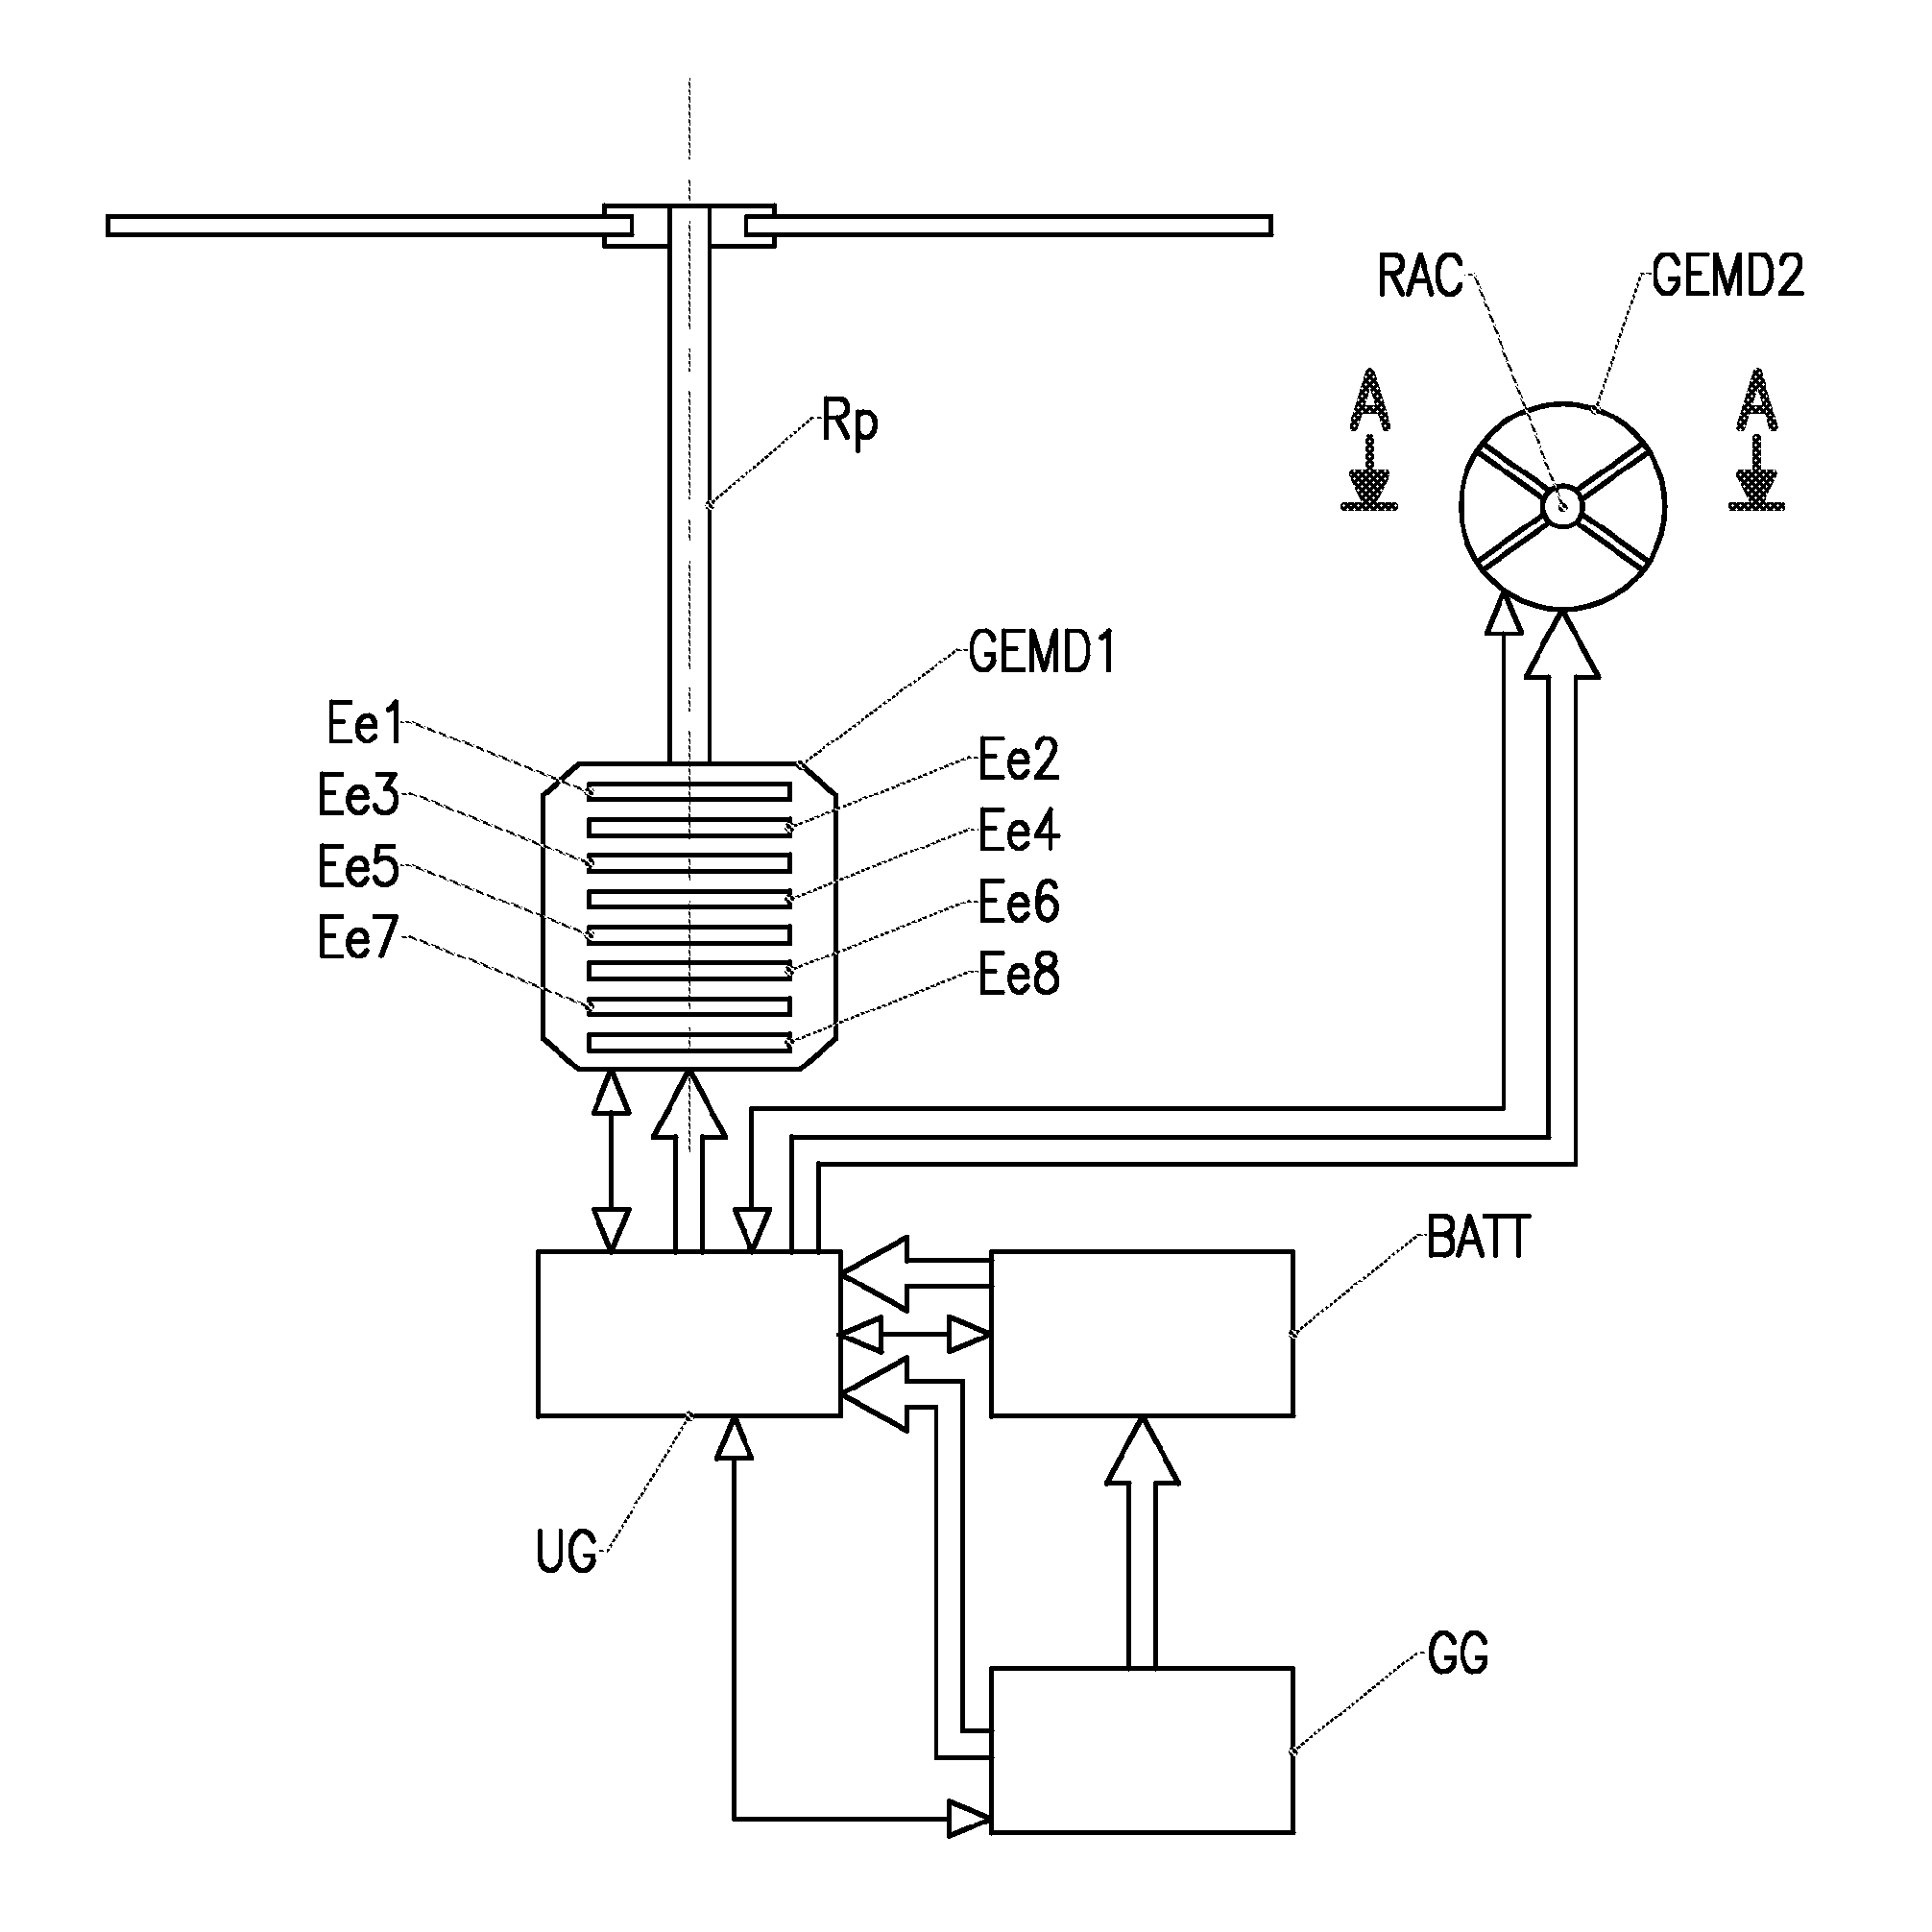 Aircraft comprising a distributed electric power unit with free wheels